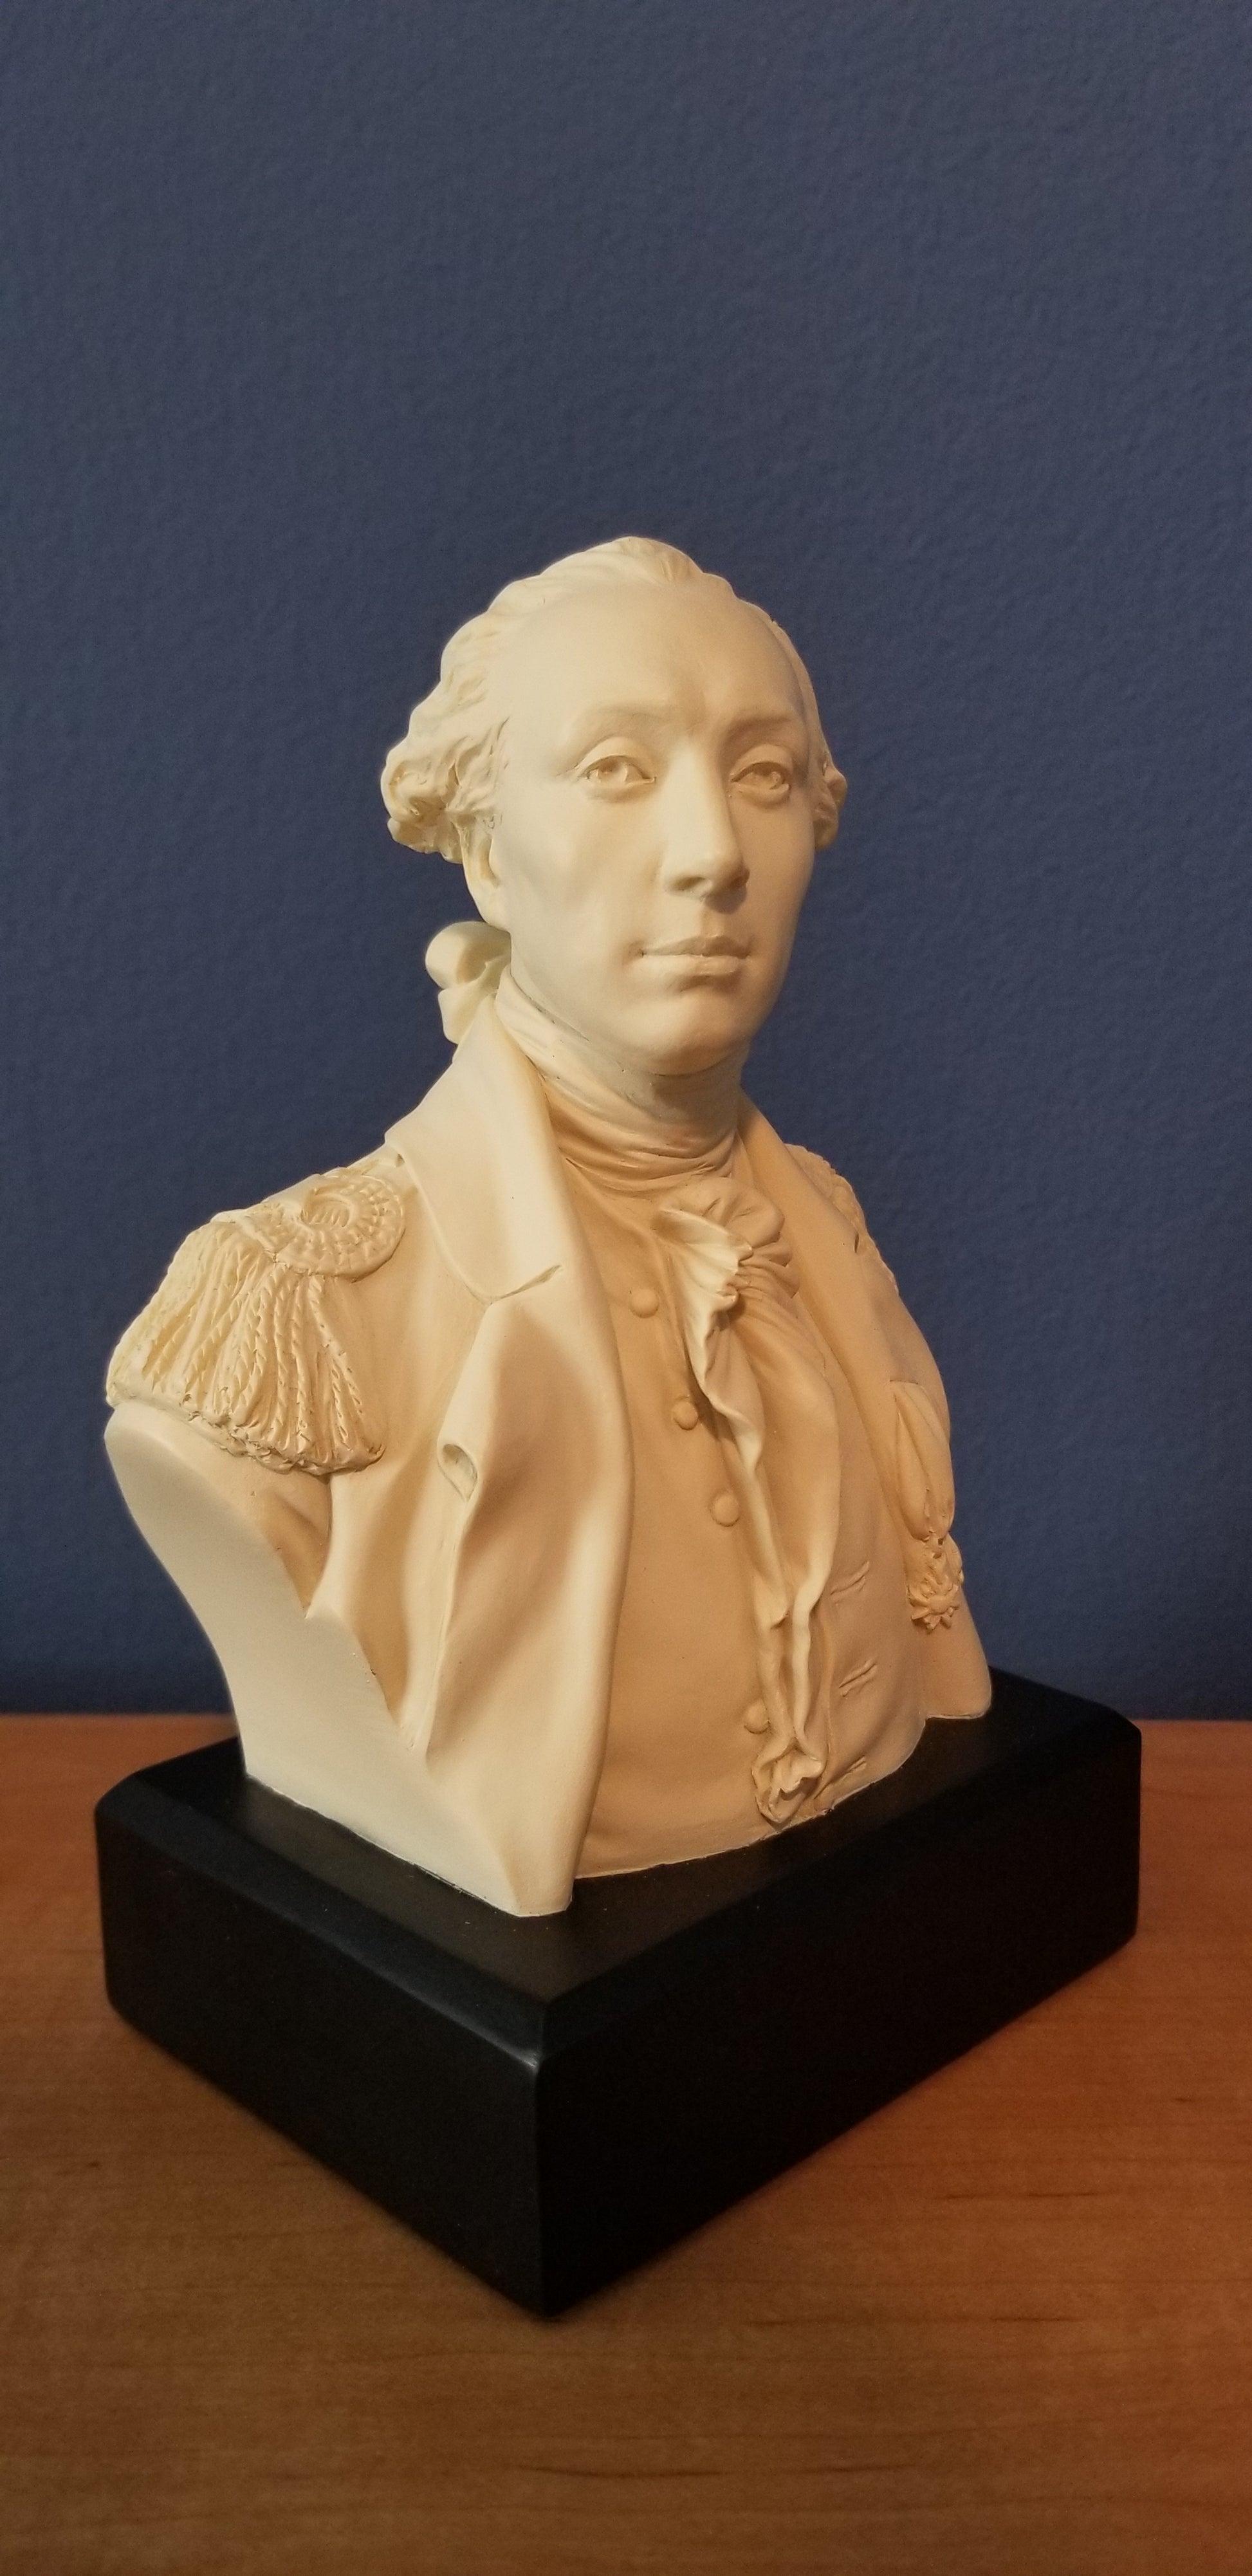 Bust of Lafayette. Bust of the Marquis de Lafayette fashioned after Houdon's bust of Lafayette. Statue of Lafayette. Statue of the Marquis de Lafayette.